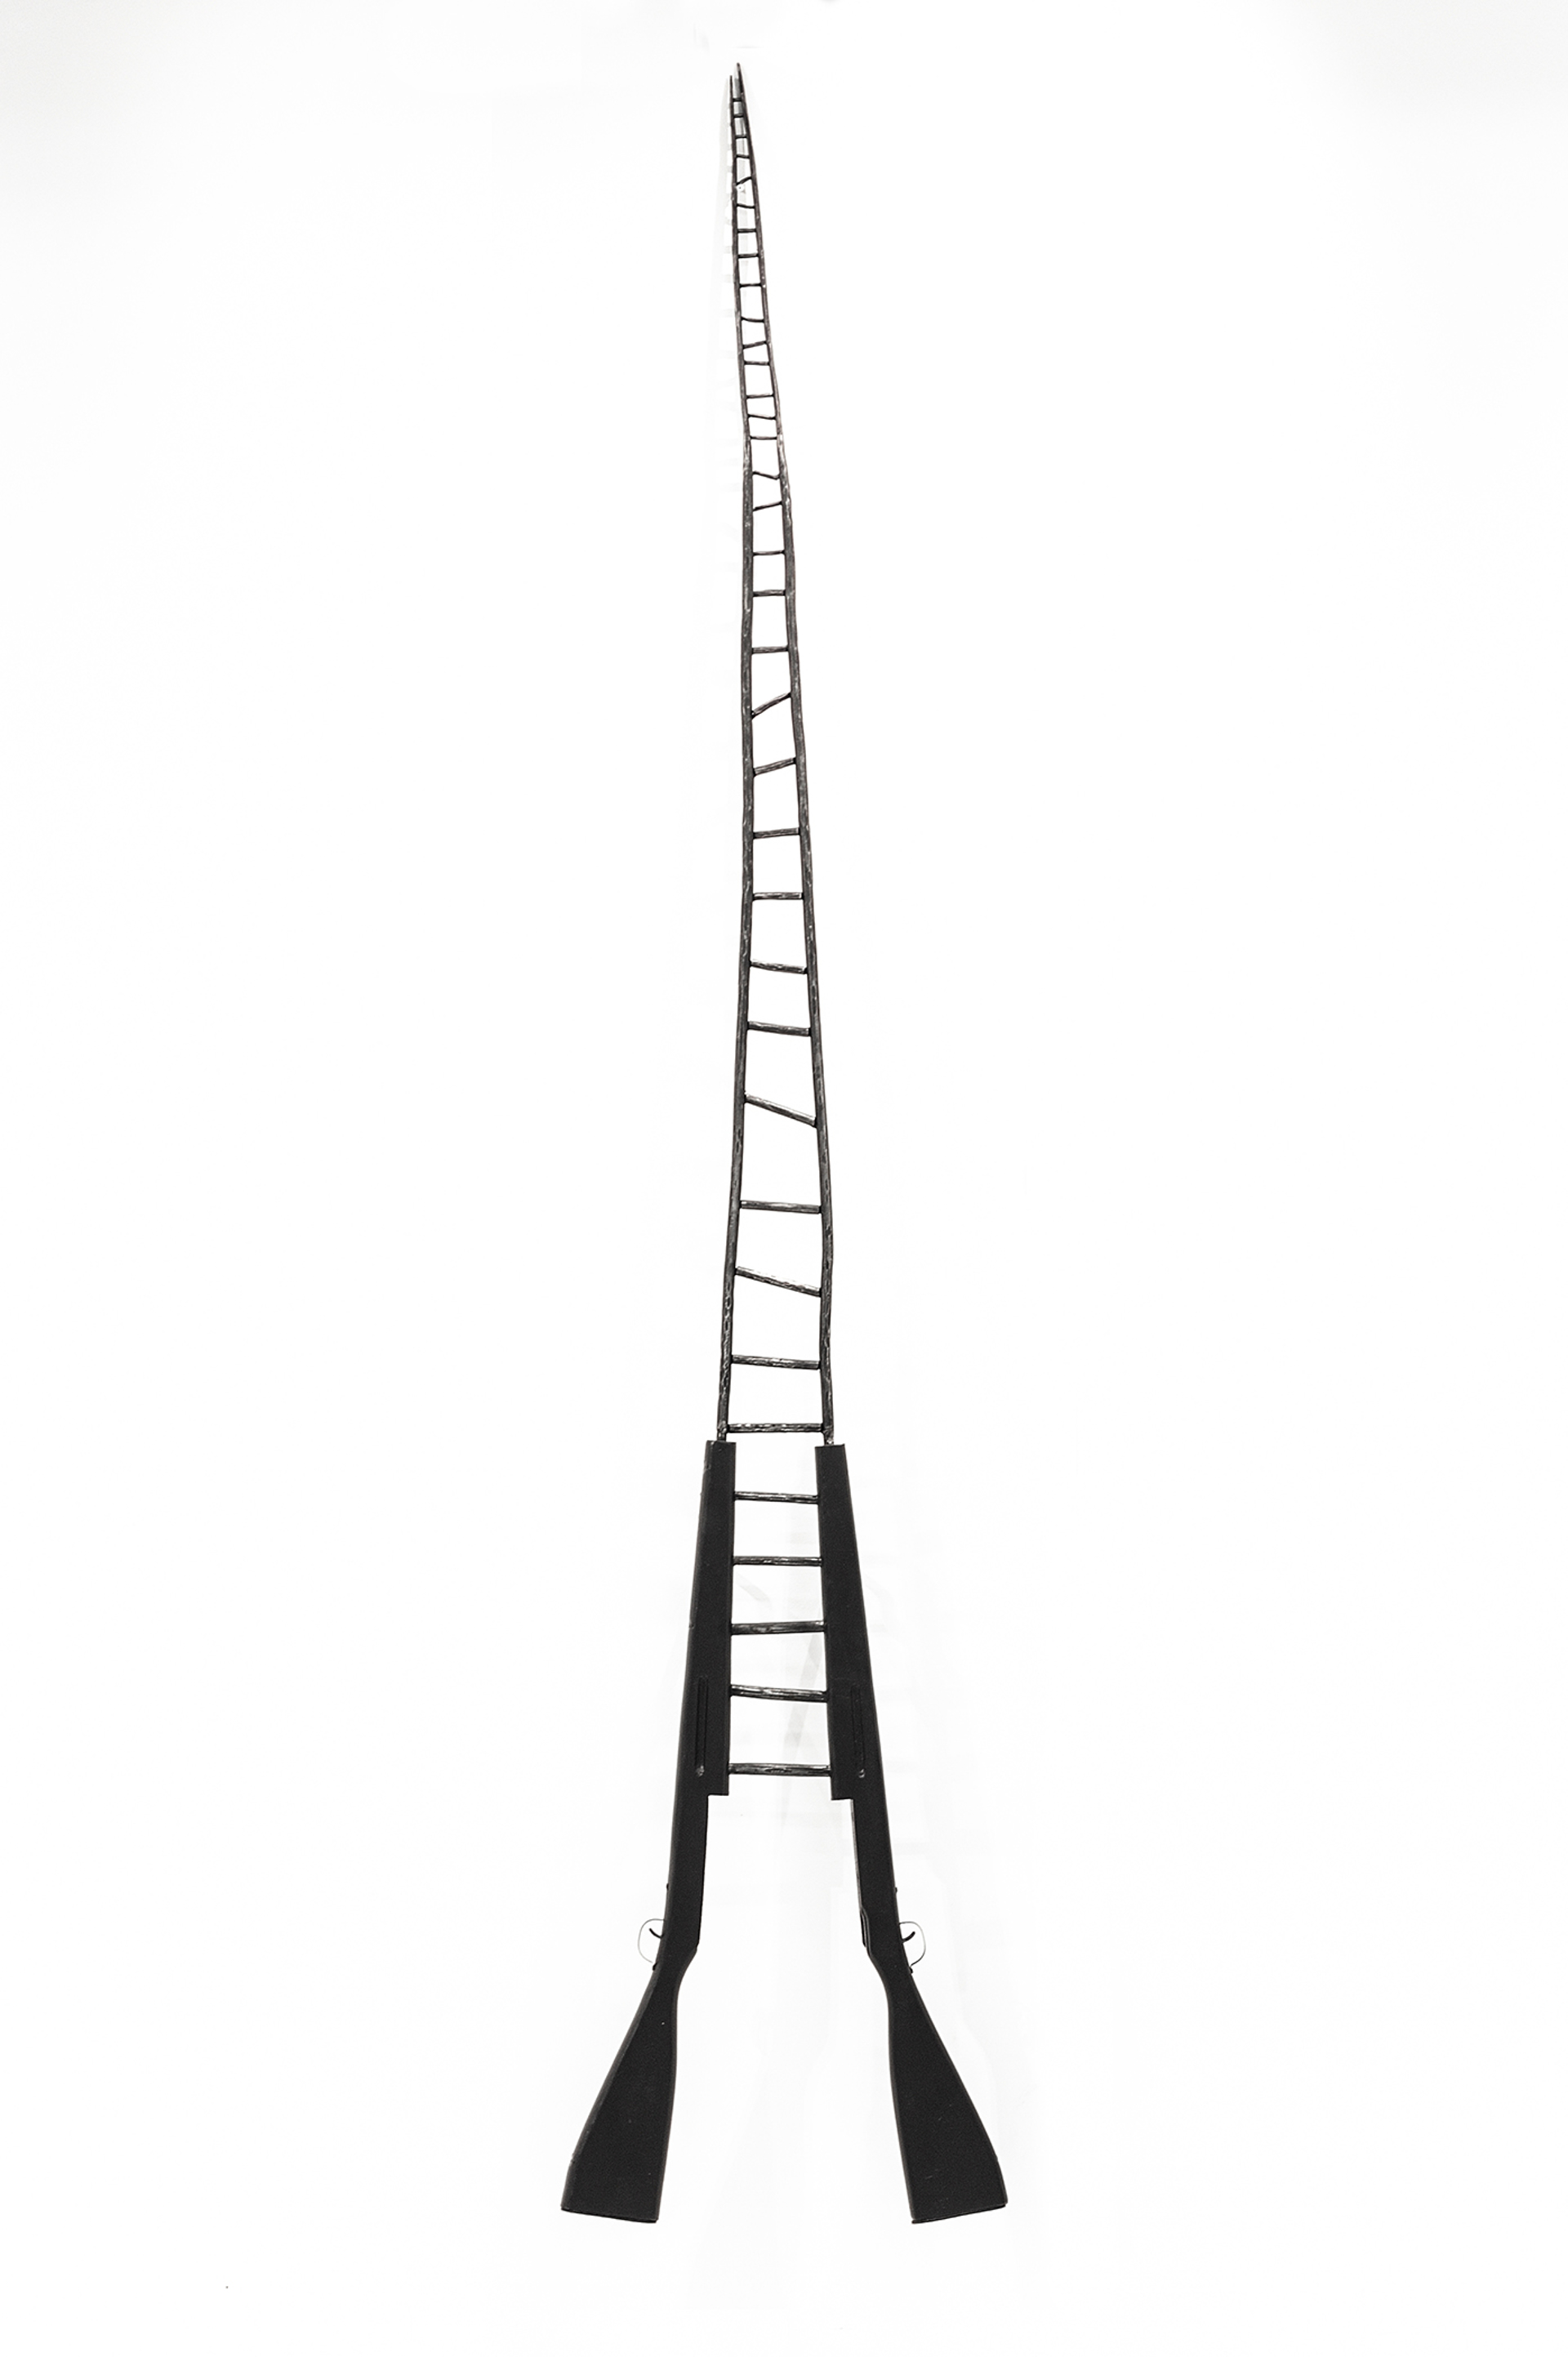 The Ladder Ascends No Further by Corrina Sephora